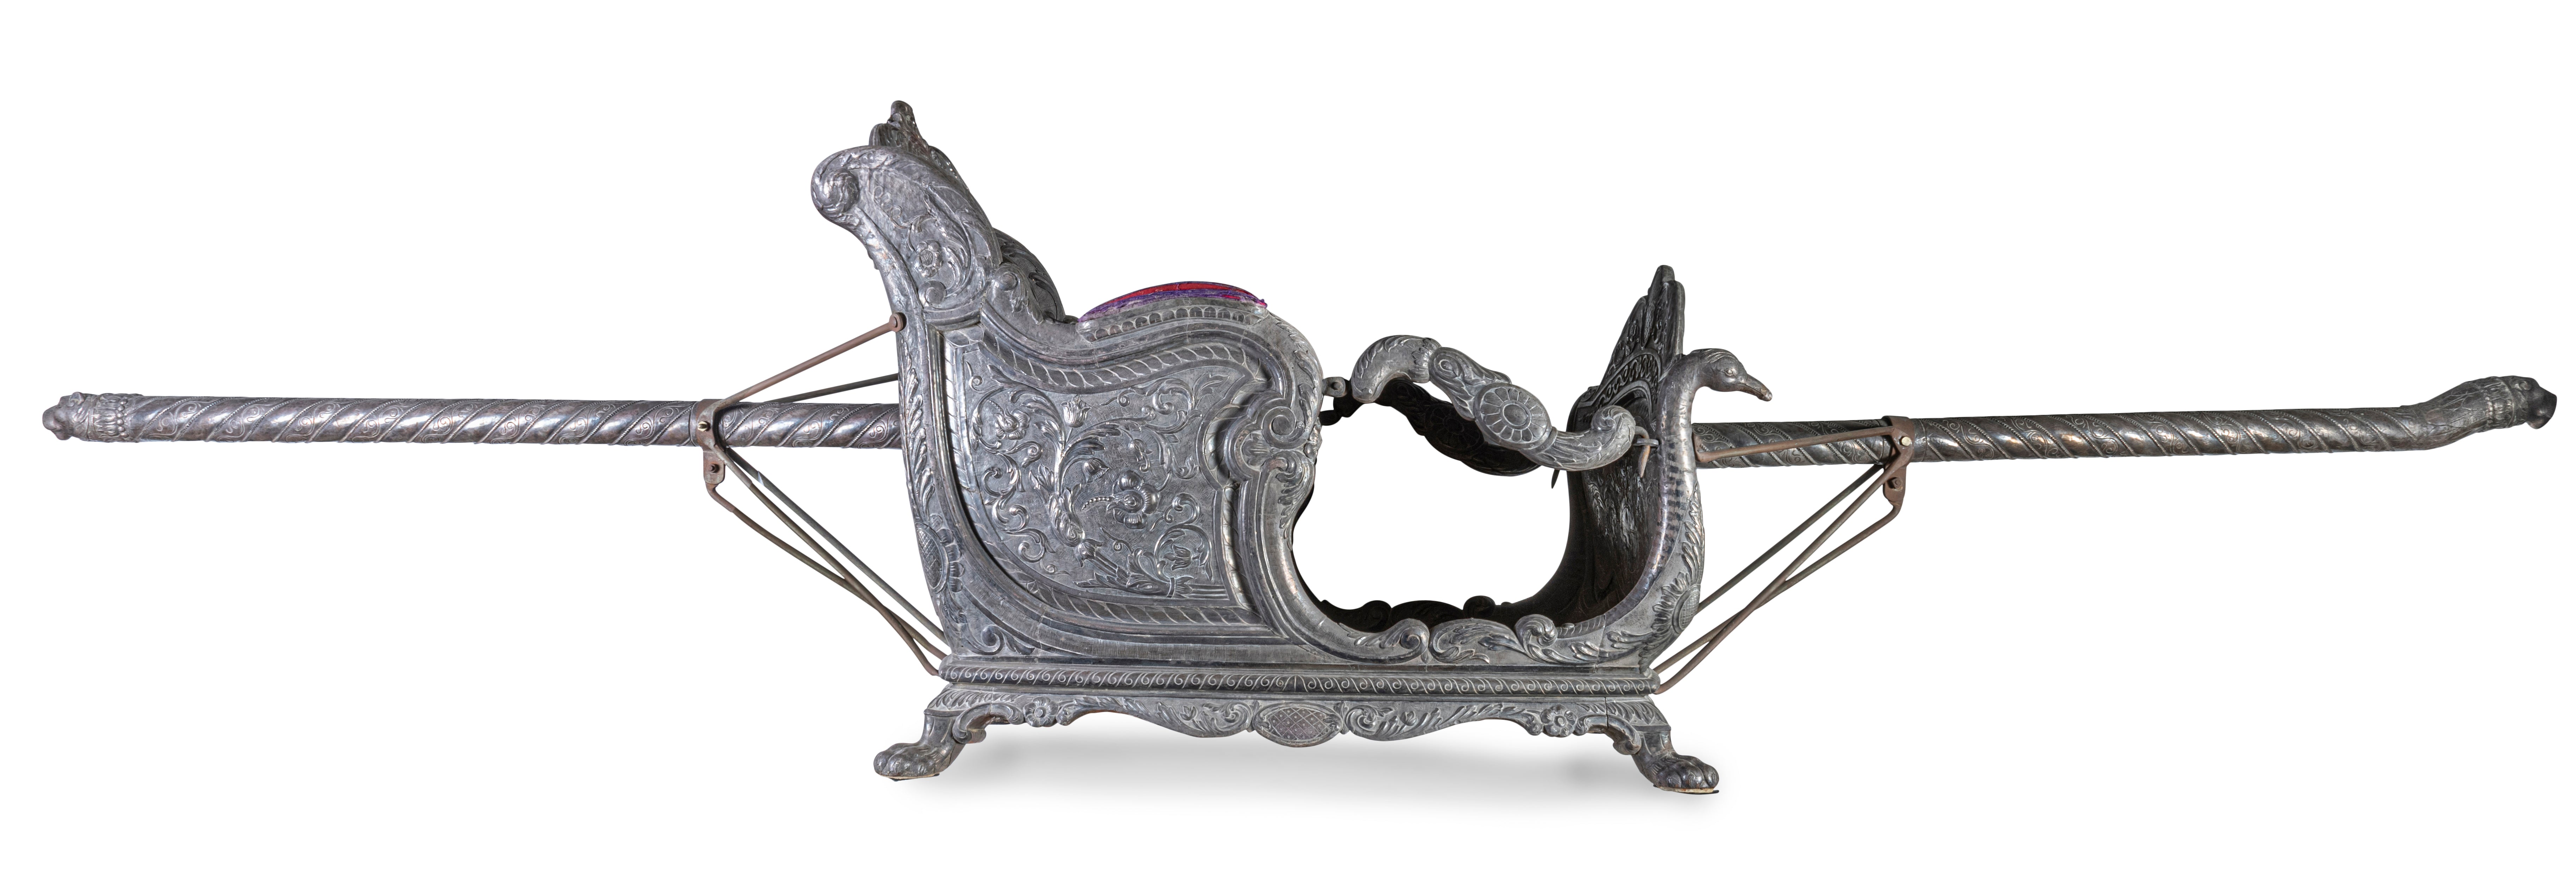 An Early 19th Century Indian Silver Foil Overlaid Palanquin